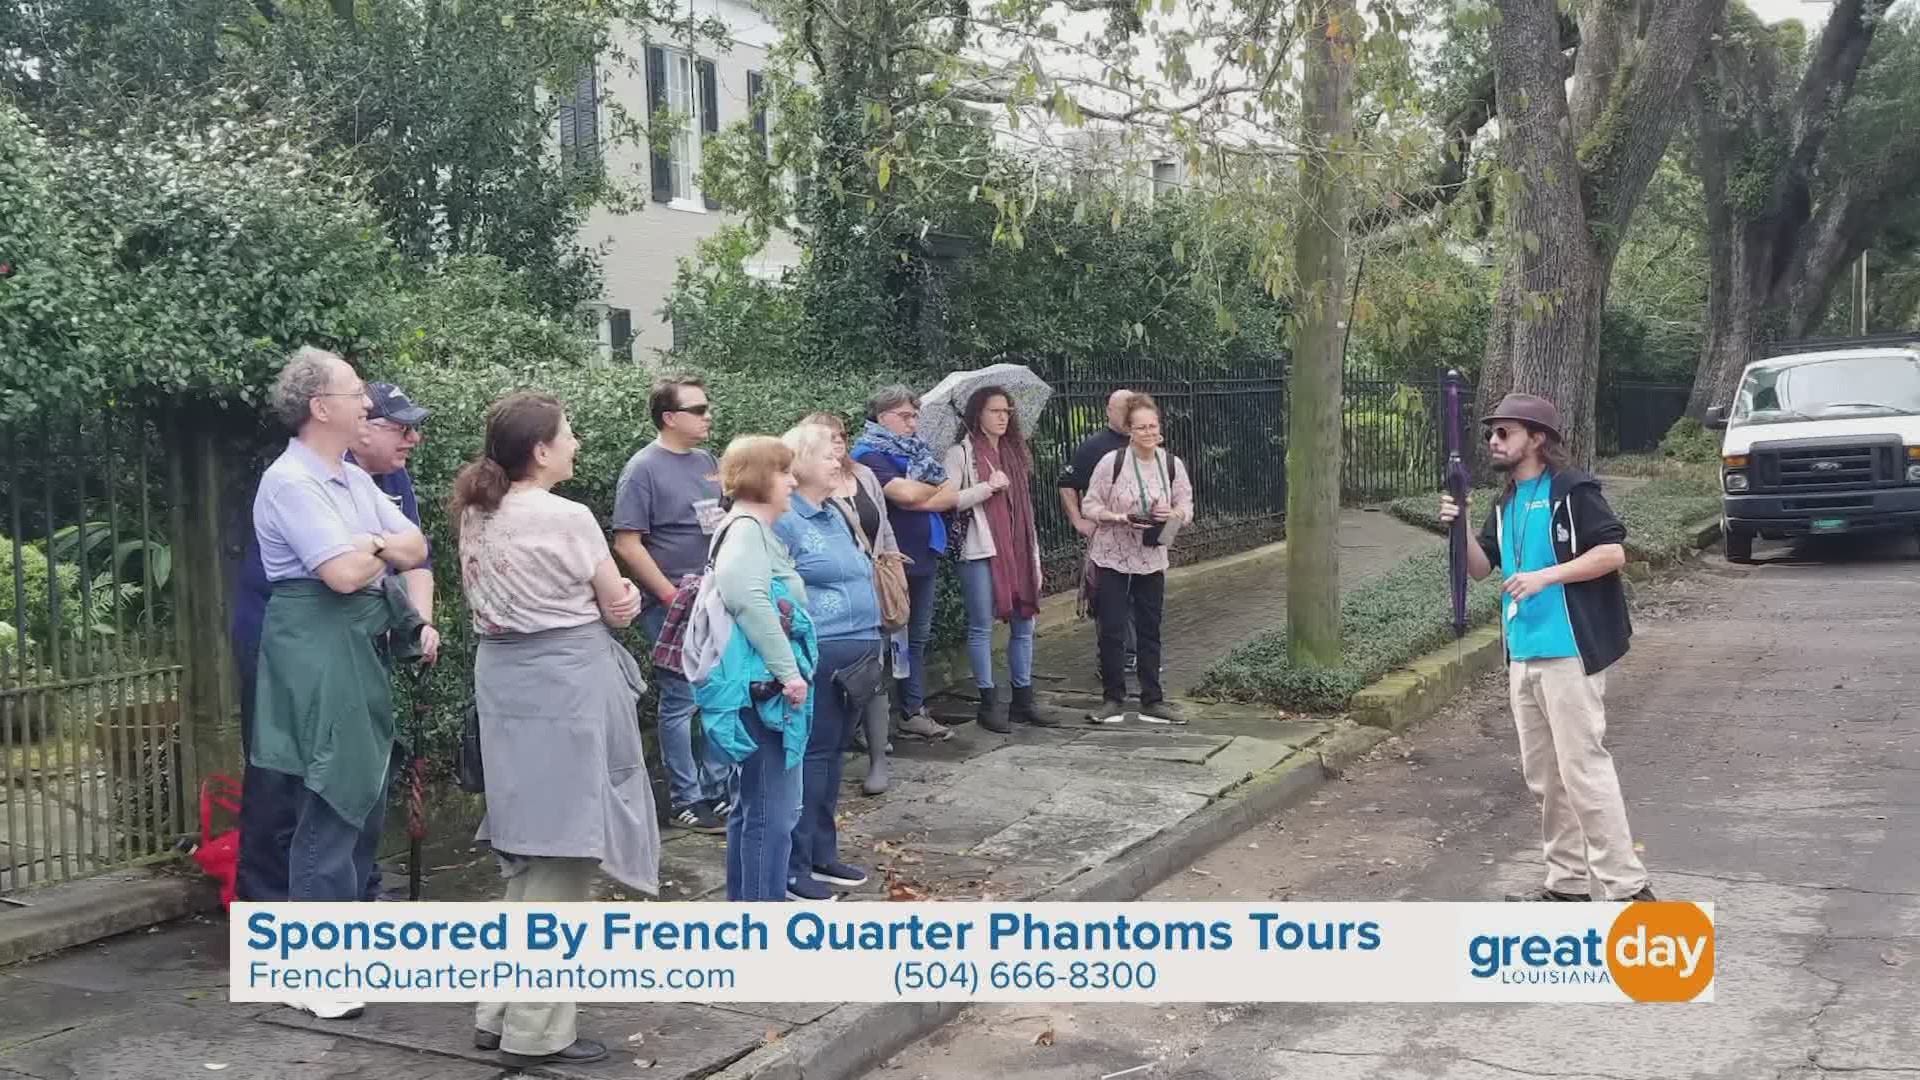 Are you ready to get spooky and have some fun, too? Then book your ghost and vampire tour! Visit frenchquarterphantoms.com to schedule your tour today.